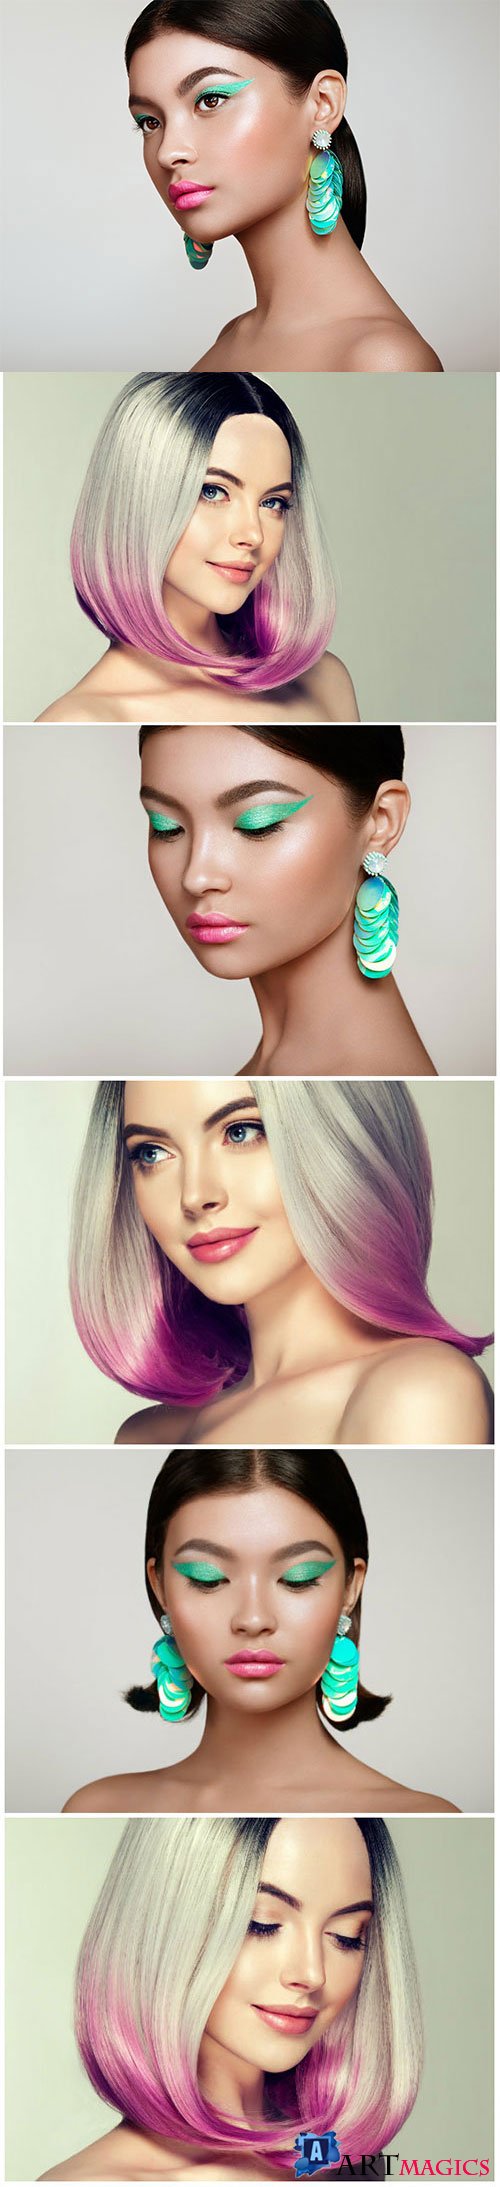 Fashion makeup and haircuts for women stock photo